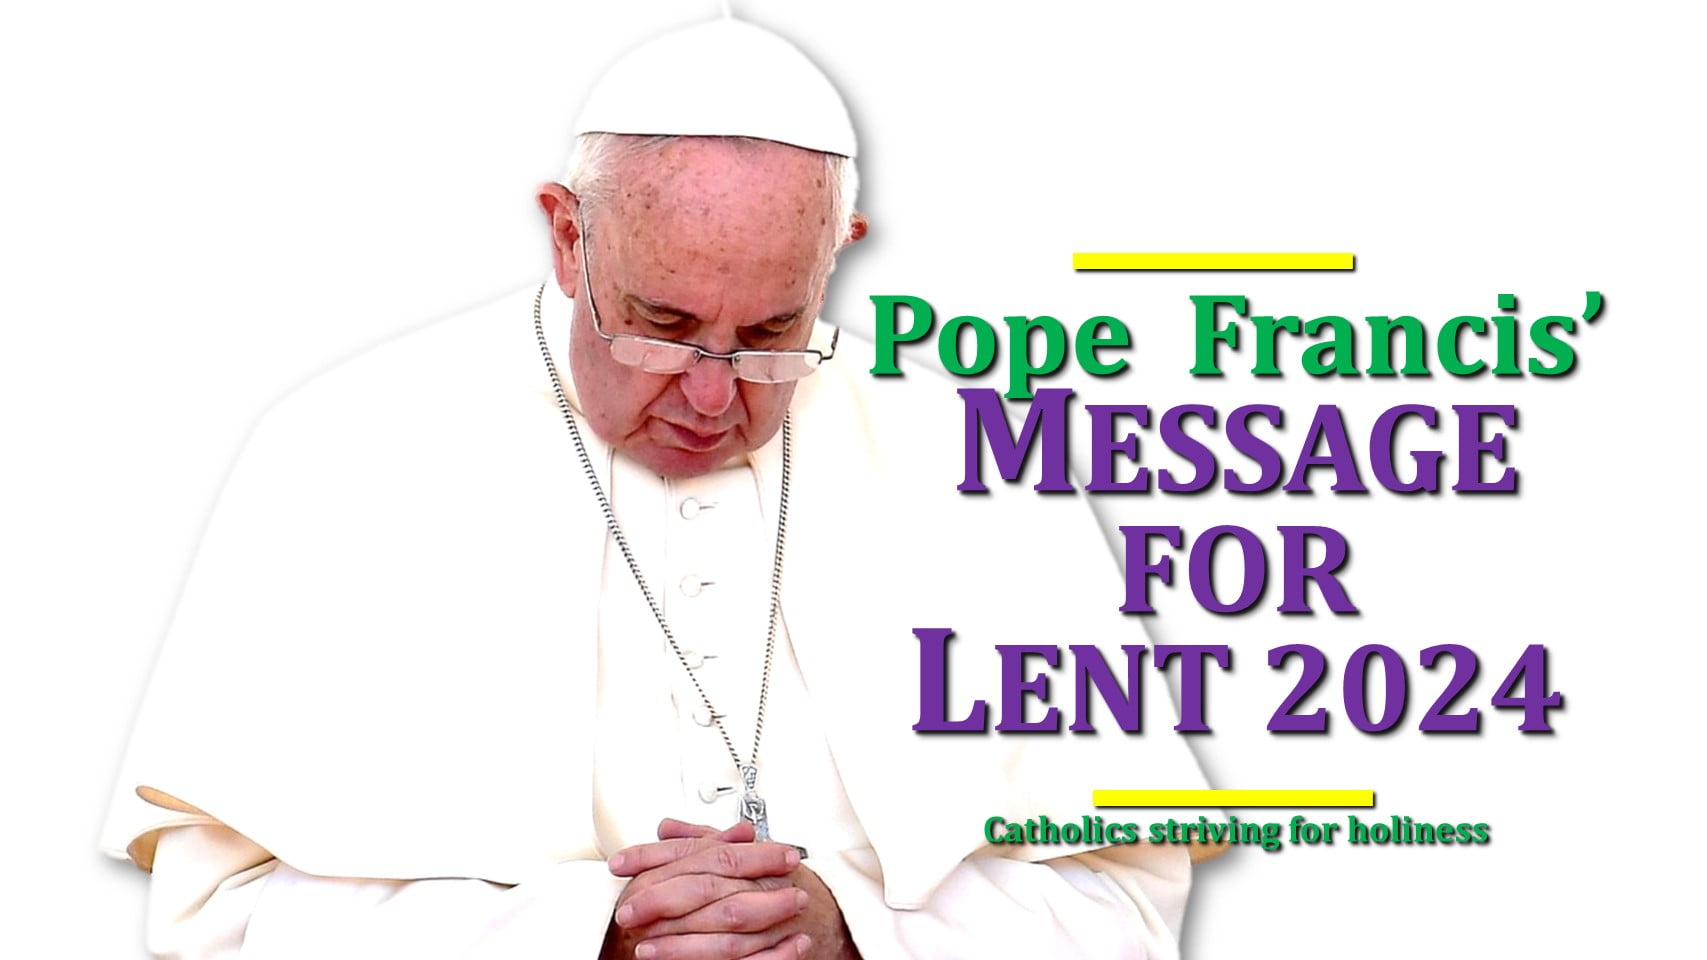 POPE FRANCIS' MESSAGE FOR LENT 2024 Catholics Striving For Holiness